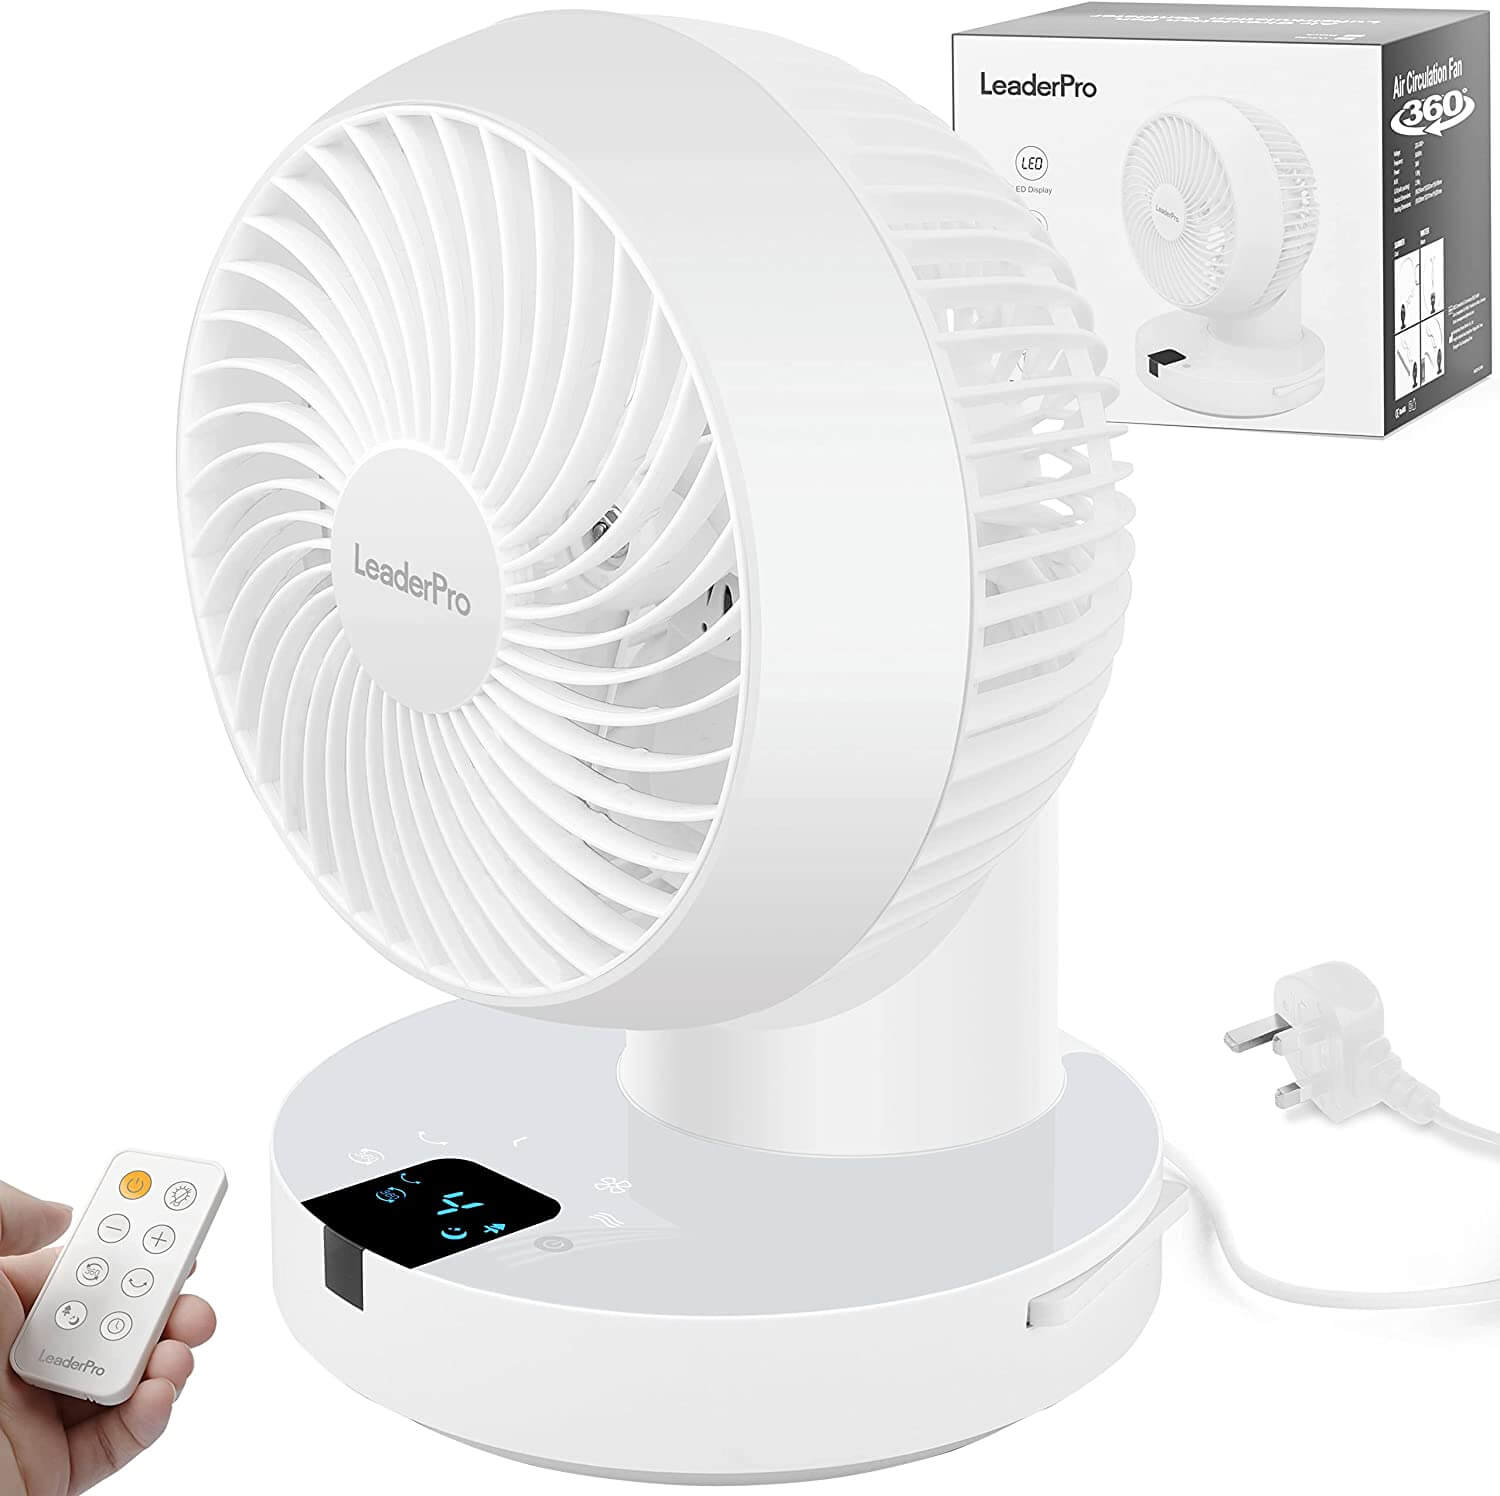 Need A Powerful Yet Silent Fan. Woozoo Fans Deliver: Top Reasons To Choose This Oscillating Globe Fan